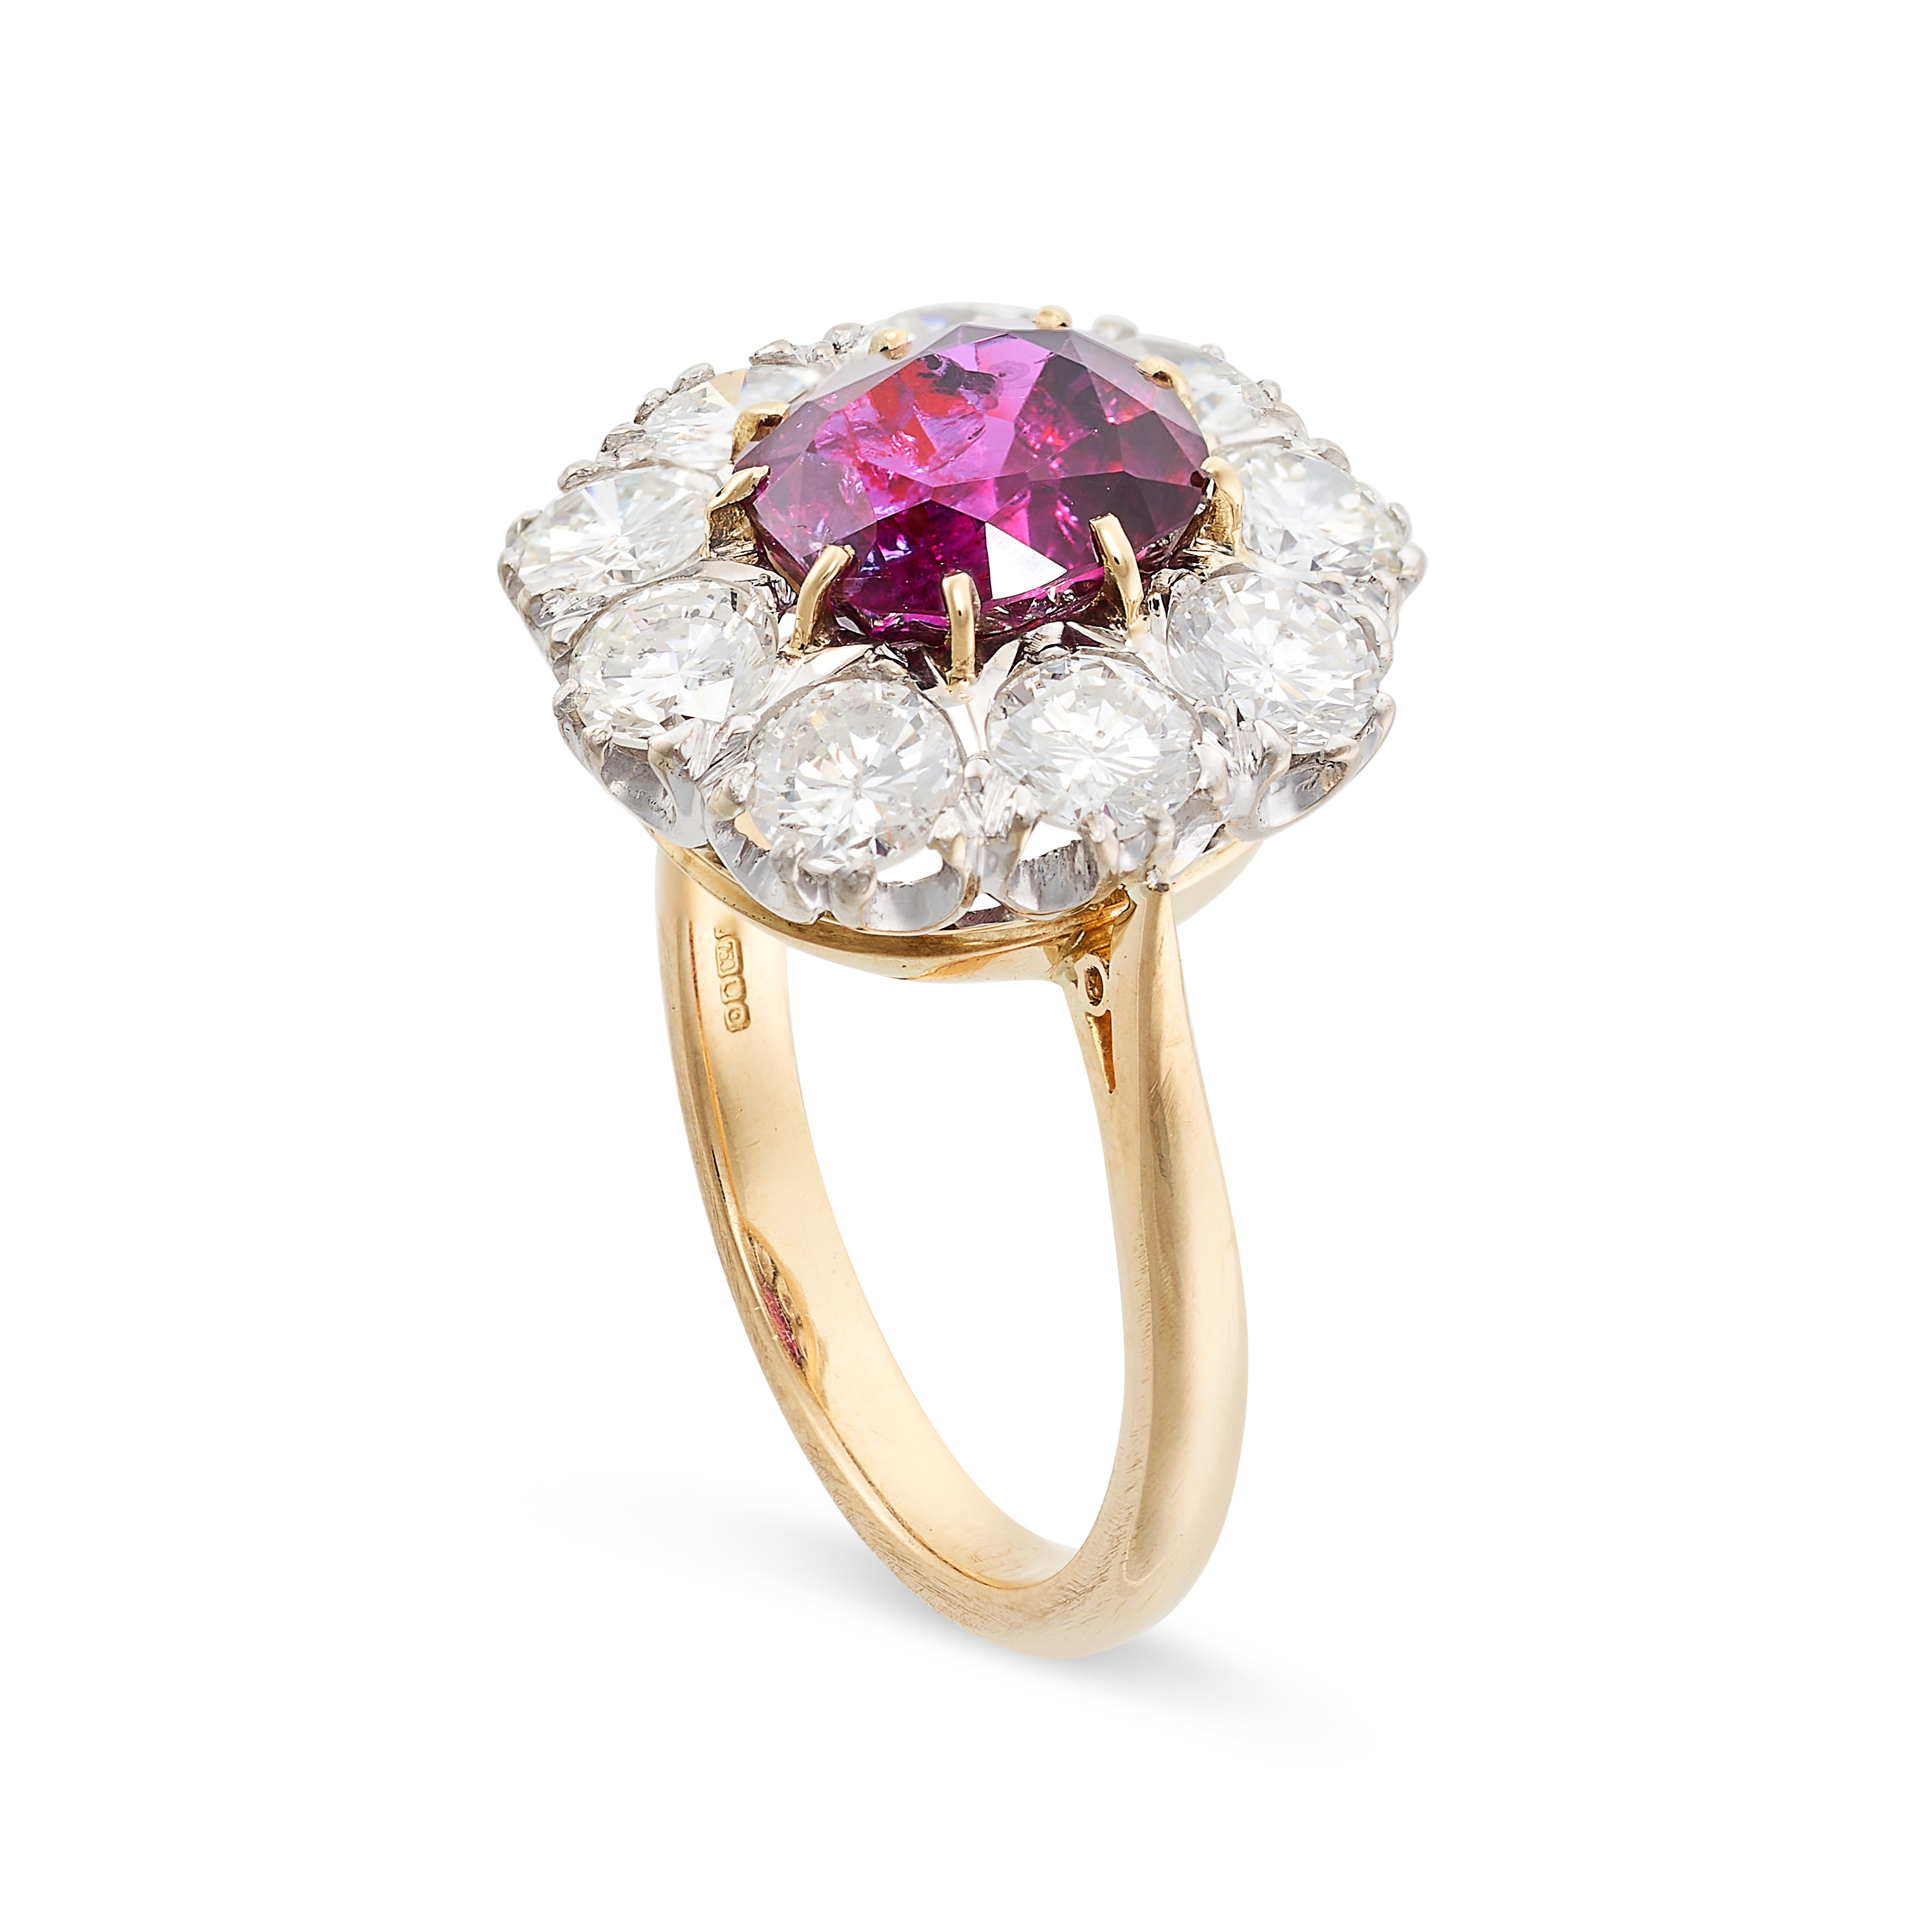 A RUBY AND DIAMOND CLUSTER RING in 18ct yellow gold, set with a cushion ruby of 3.27 carats within a - Image 2 of 2